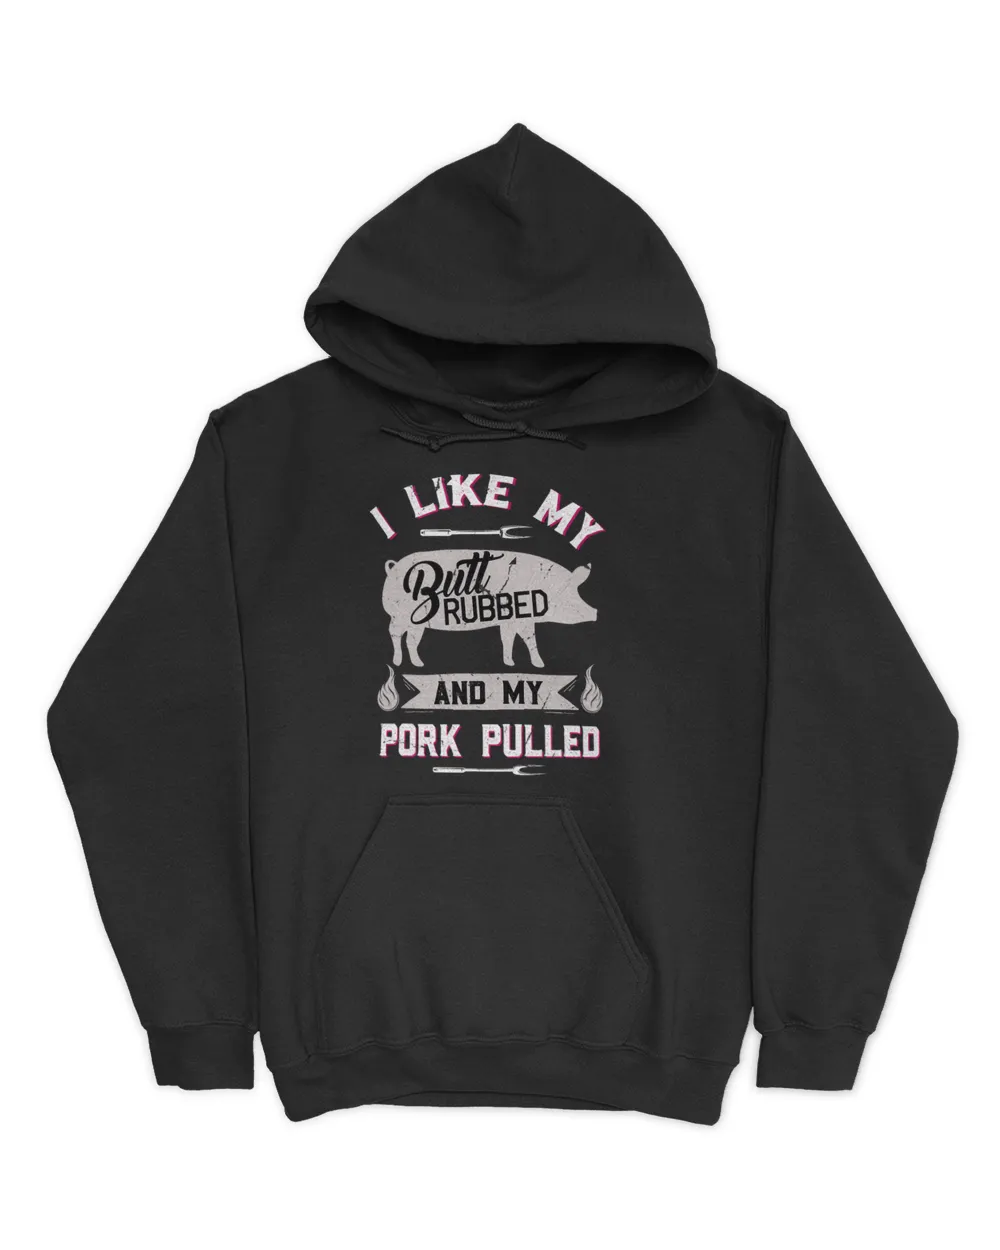 Funny BBQ Grilling Quote Pig Pulled Pork